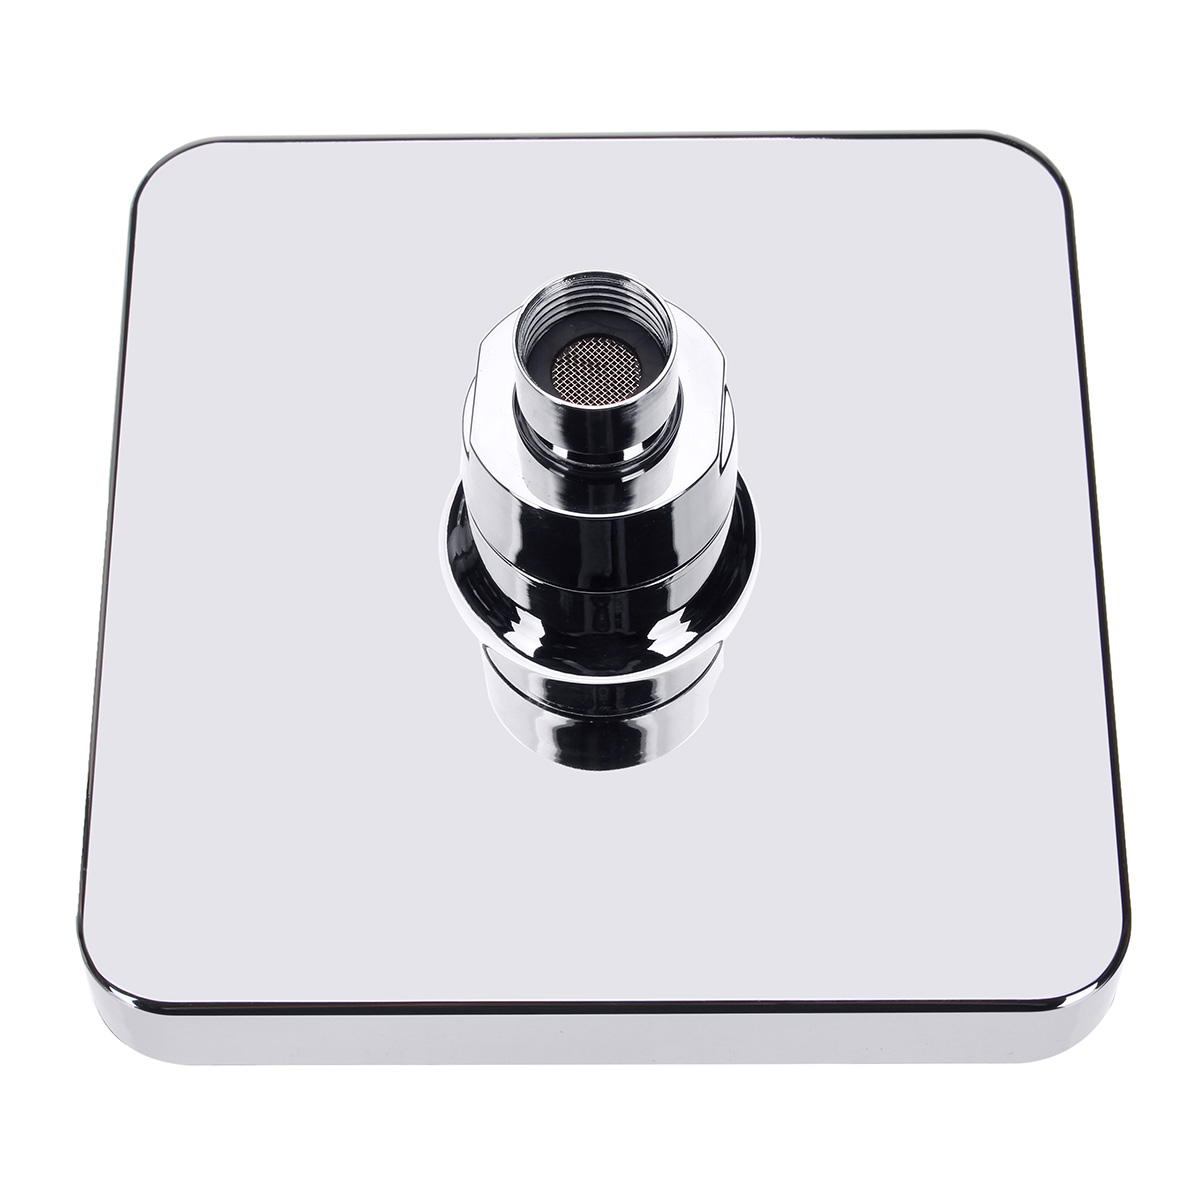 360deg-Adjustable-Chrome-Water-Temperature-Controlled-Multi-Color-LED-Shower-Head-1296624